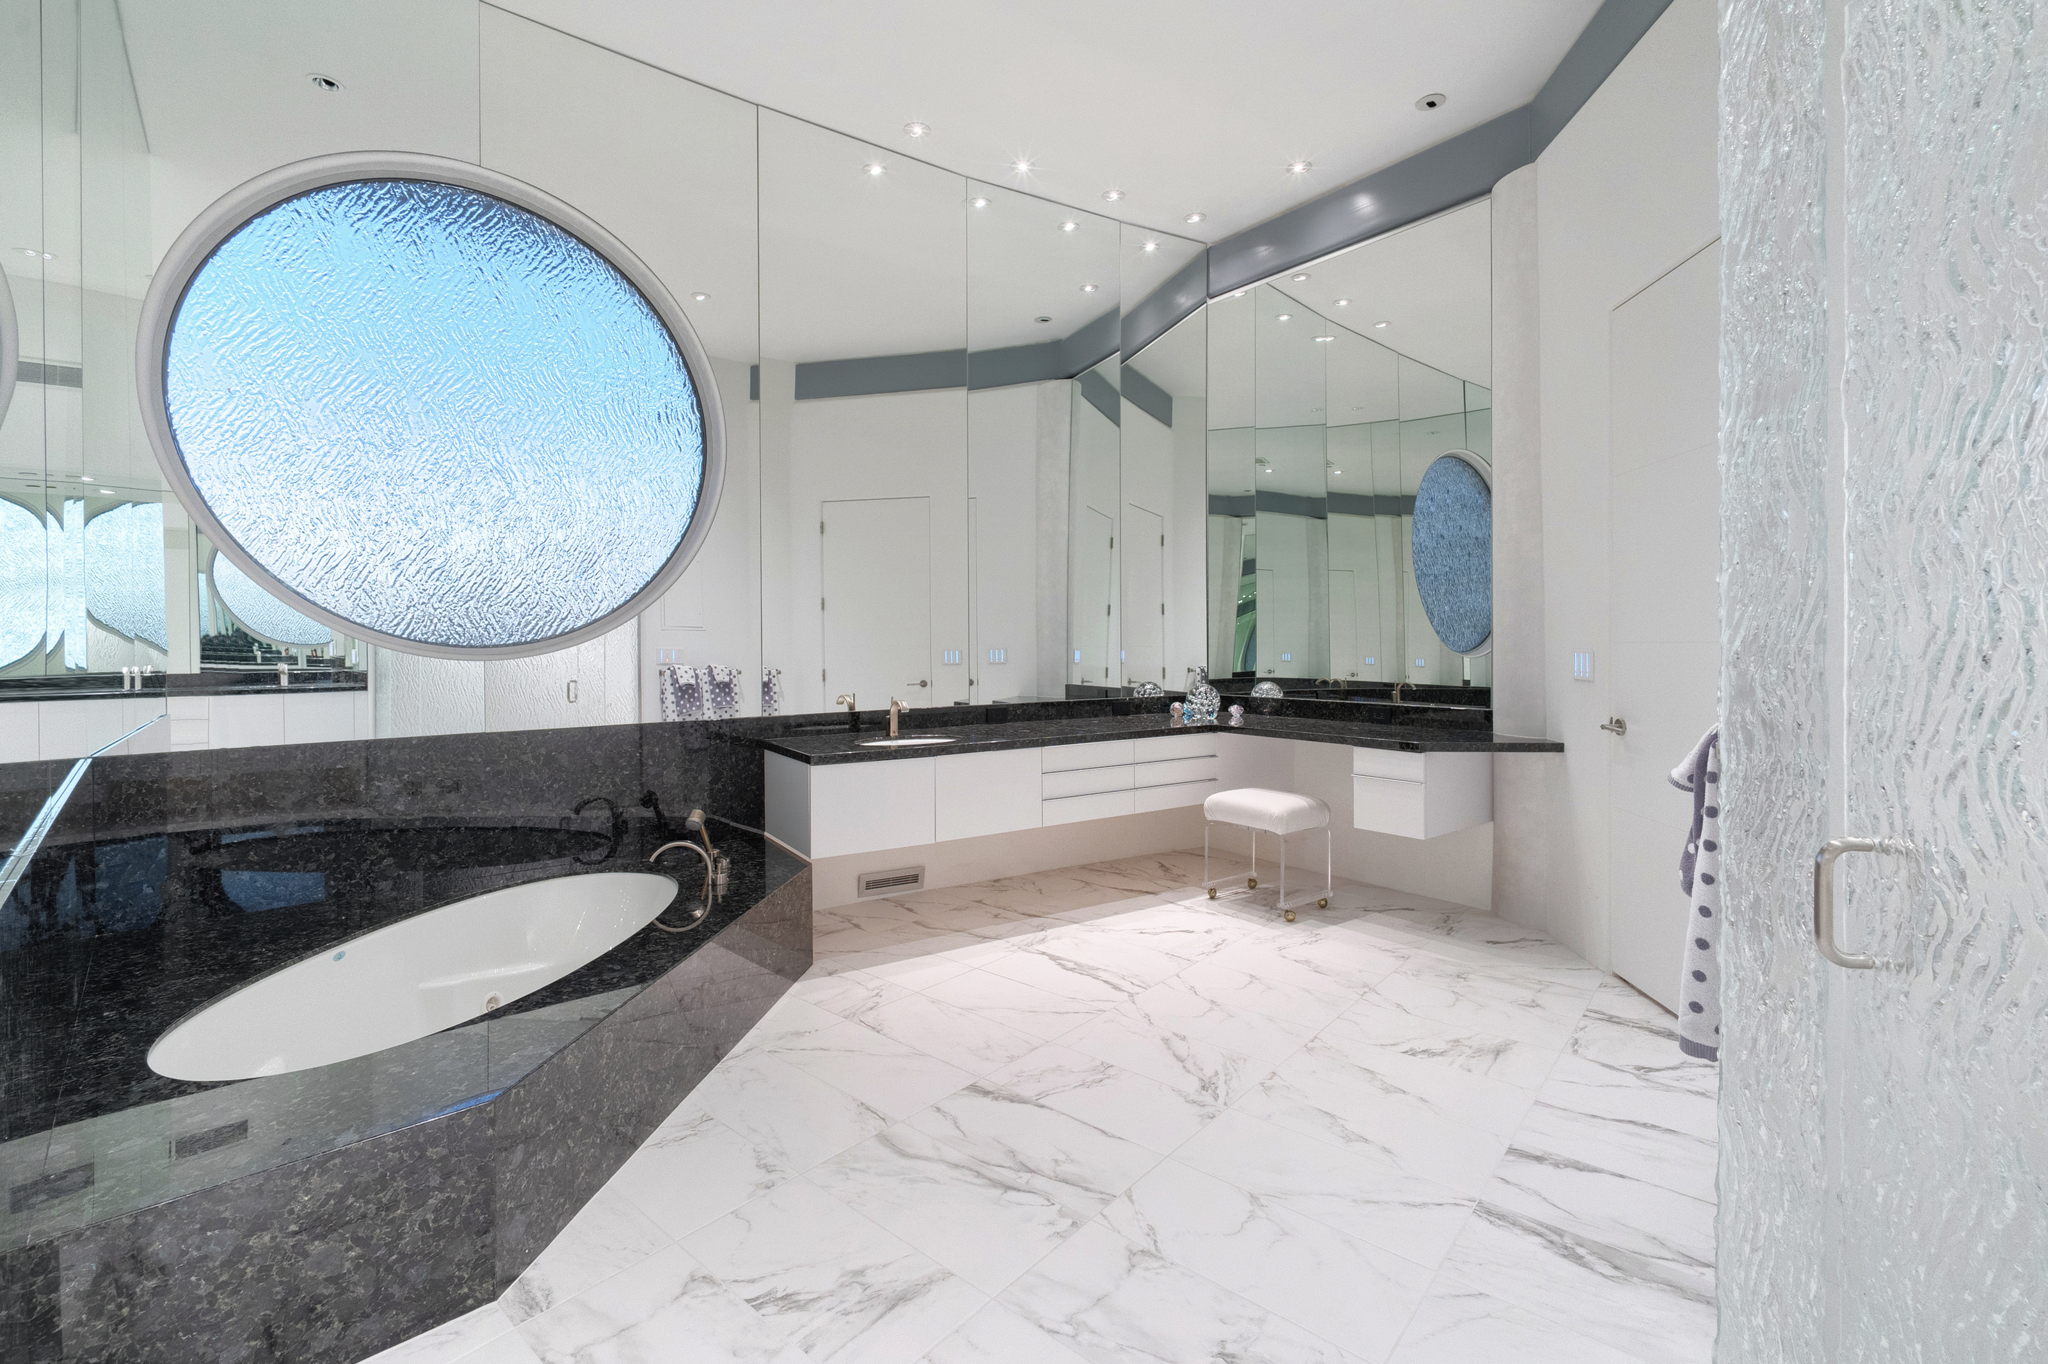 Owner's Suite Bathtub: Round frosted glass window mirrors glass on facing walk in shower